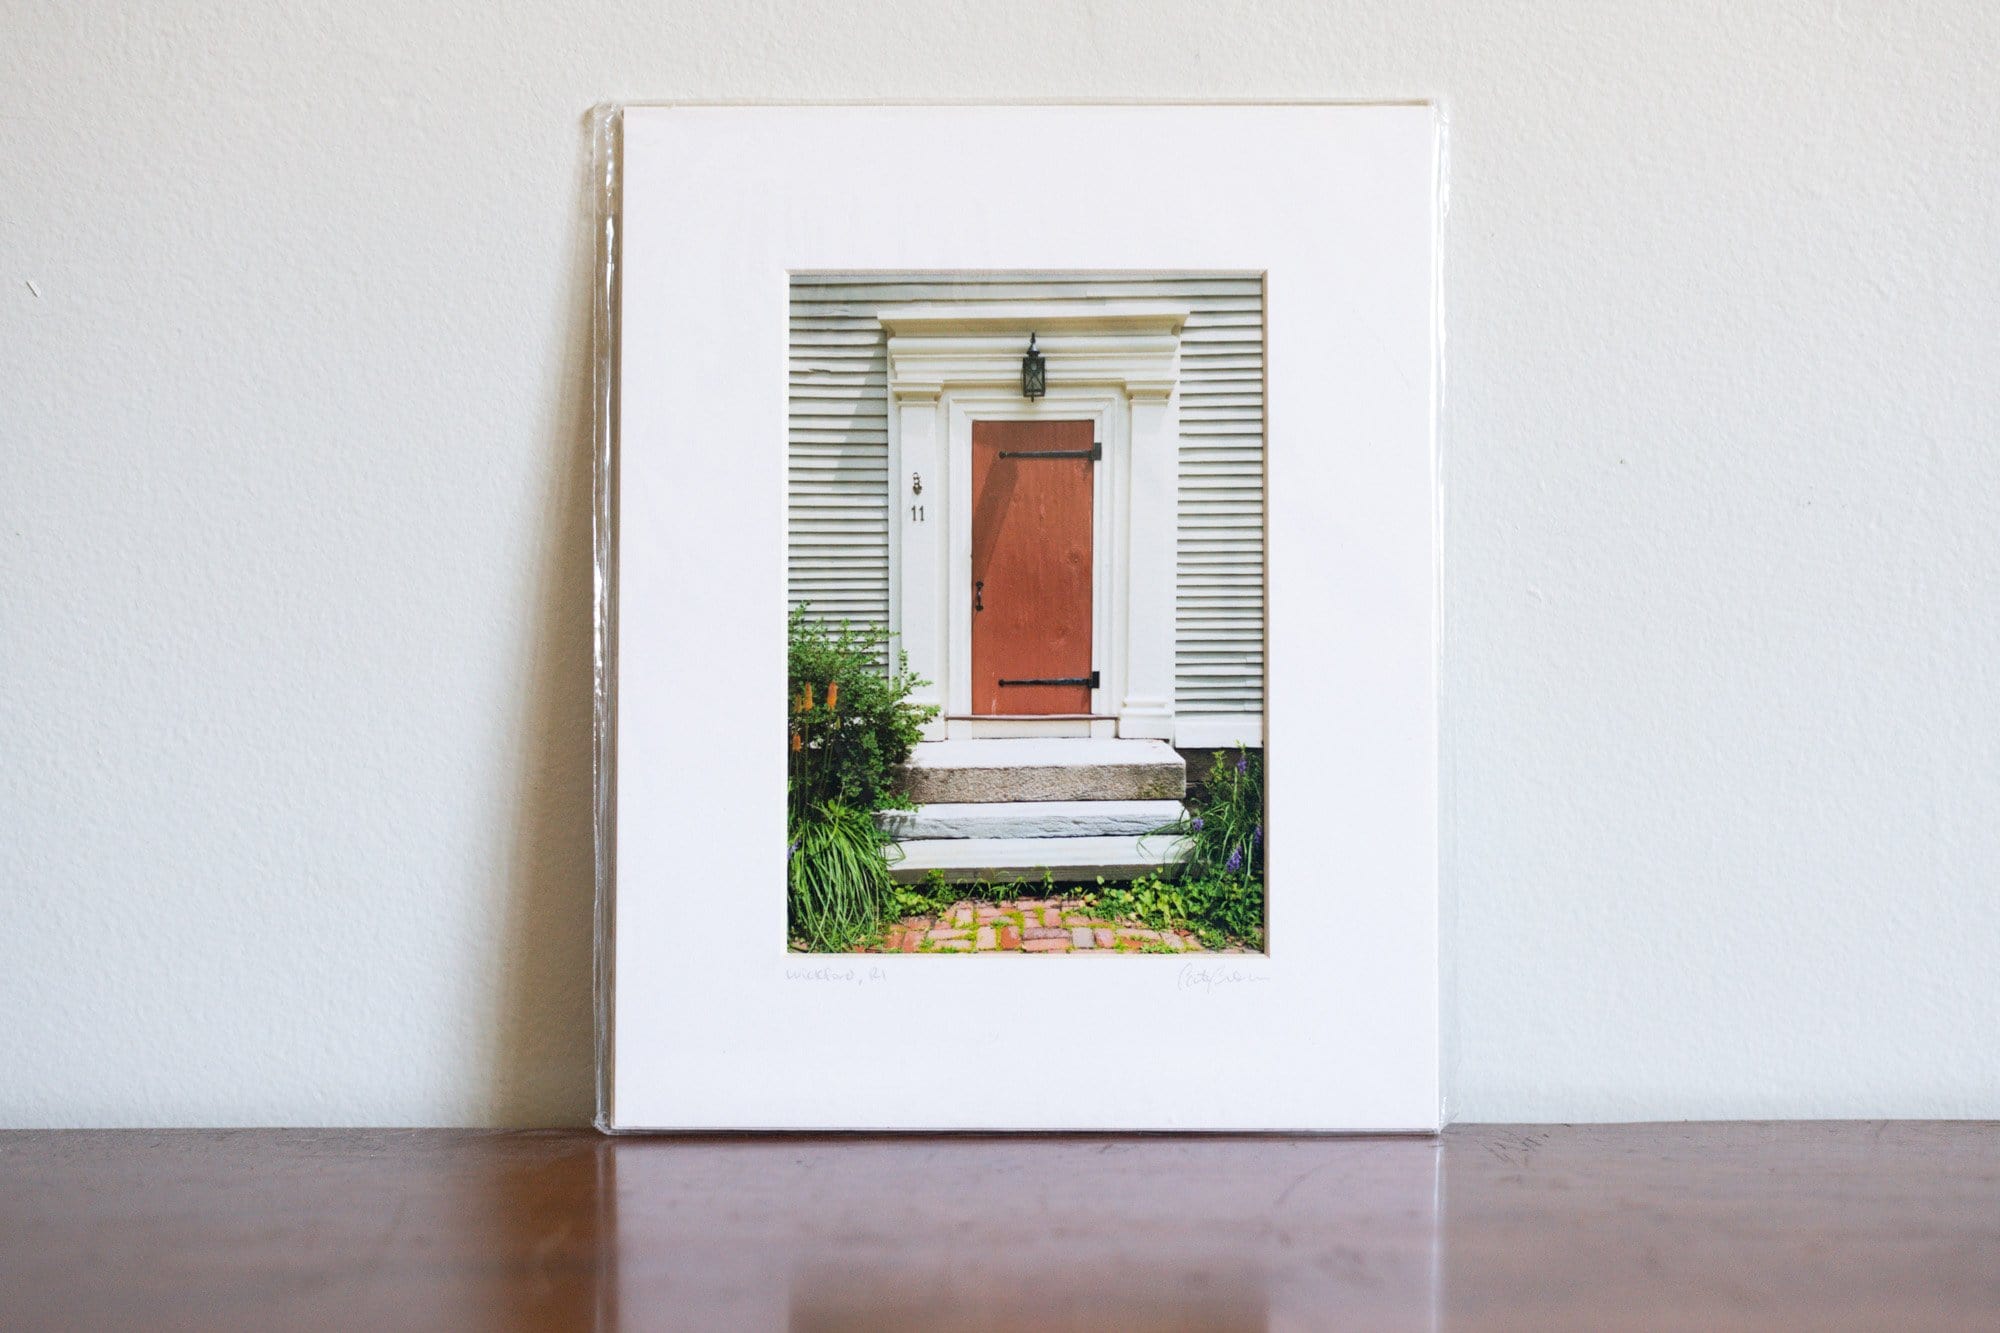 Cate Brown Photo Red Door Wickford Doors in Summer // Matted Mini Print 8x10" Available Inventory Ocean Fine Art